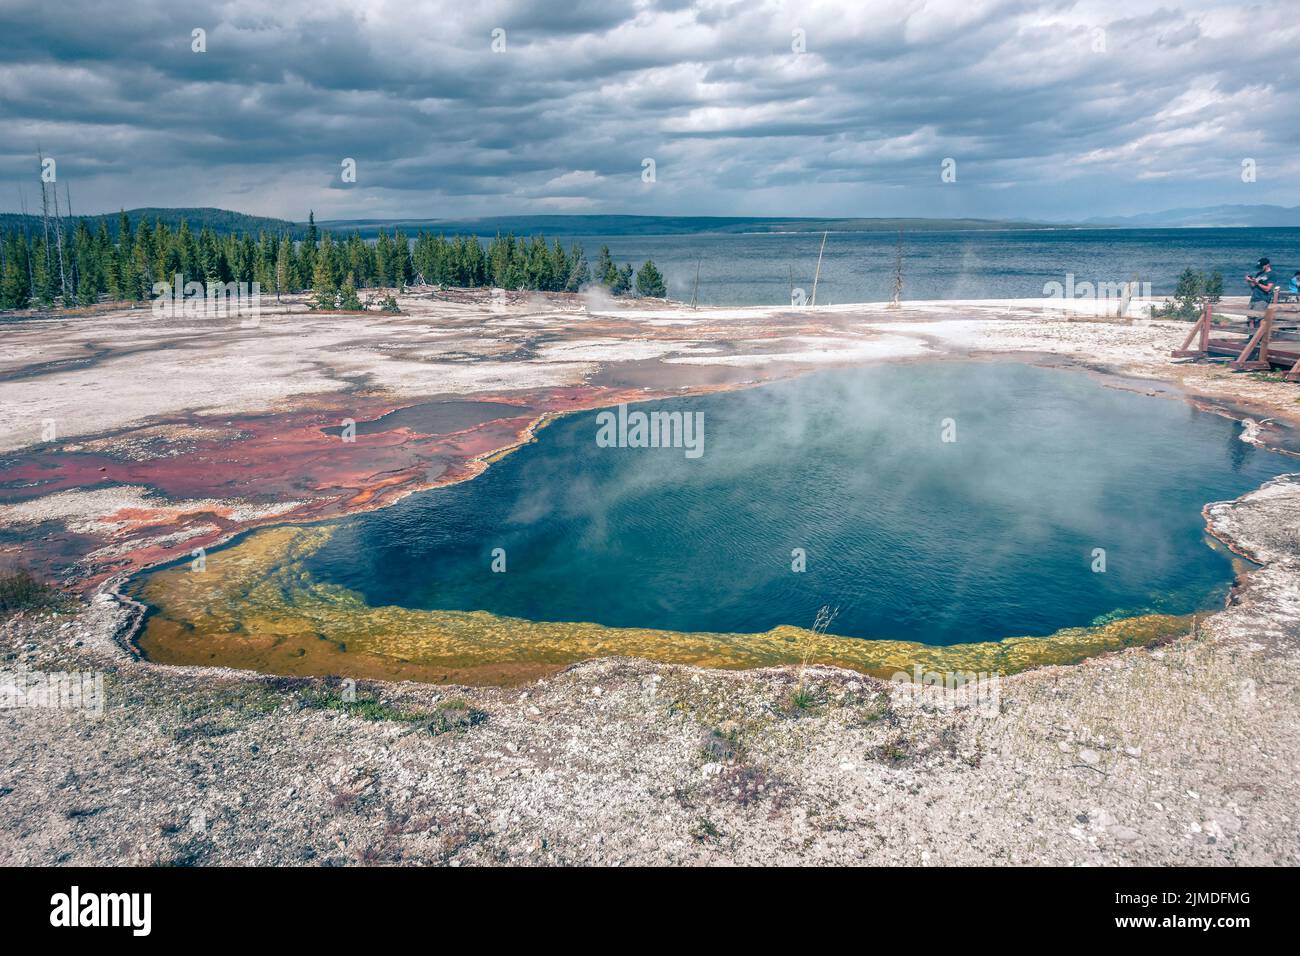 Hot thermal spring Abyss Pool in Yellowstone National Park, West Thumb Geyser Basin area, Wyoming, USA Stock Photo